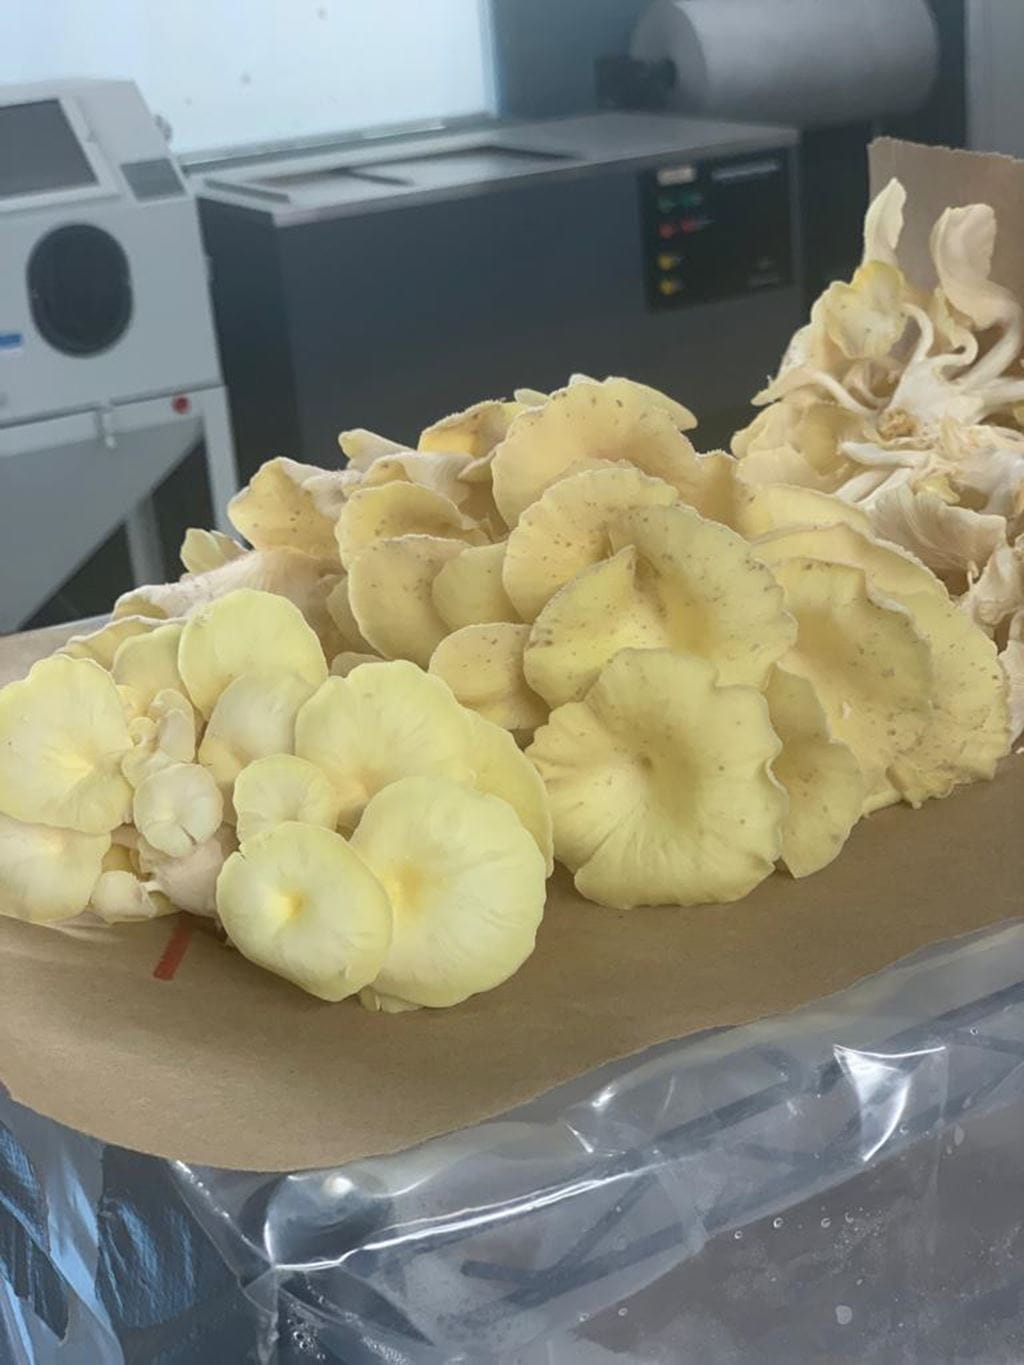 Oyster mushrooms grow in the Centre for Advanced Manufacturing and Technology at Sheridan College